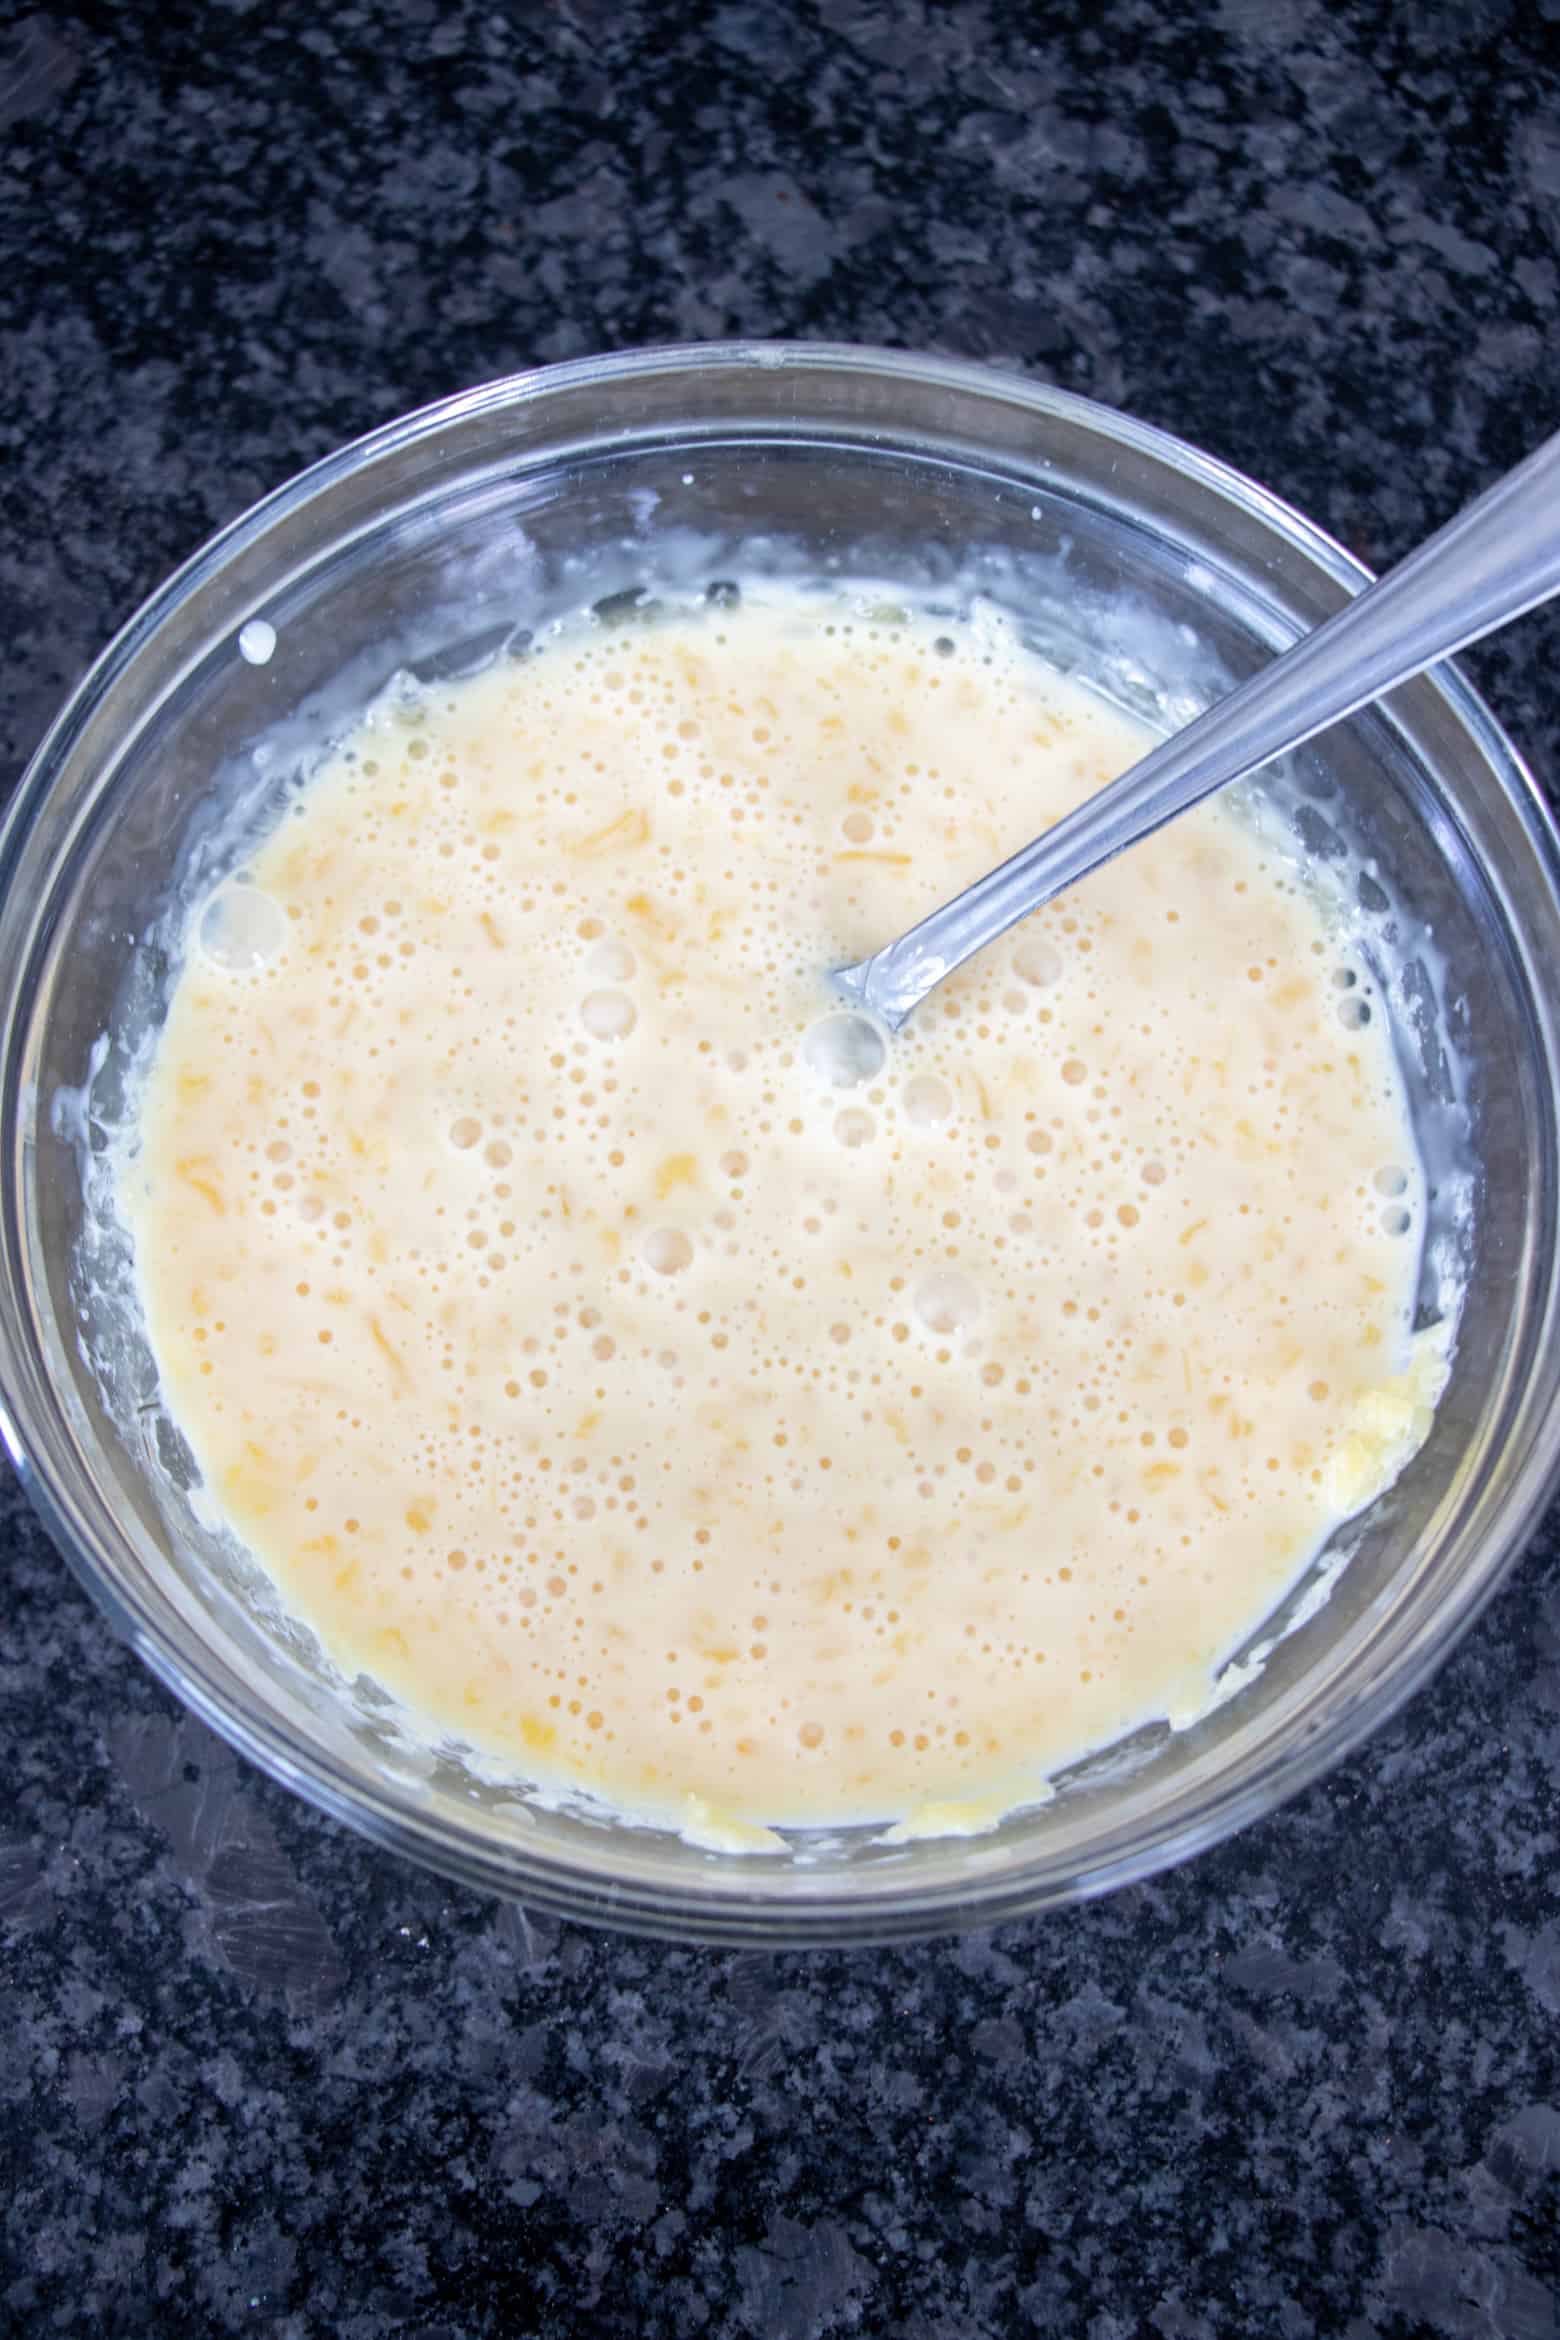 Egg mixture mixed with yeast mixture.